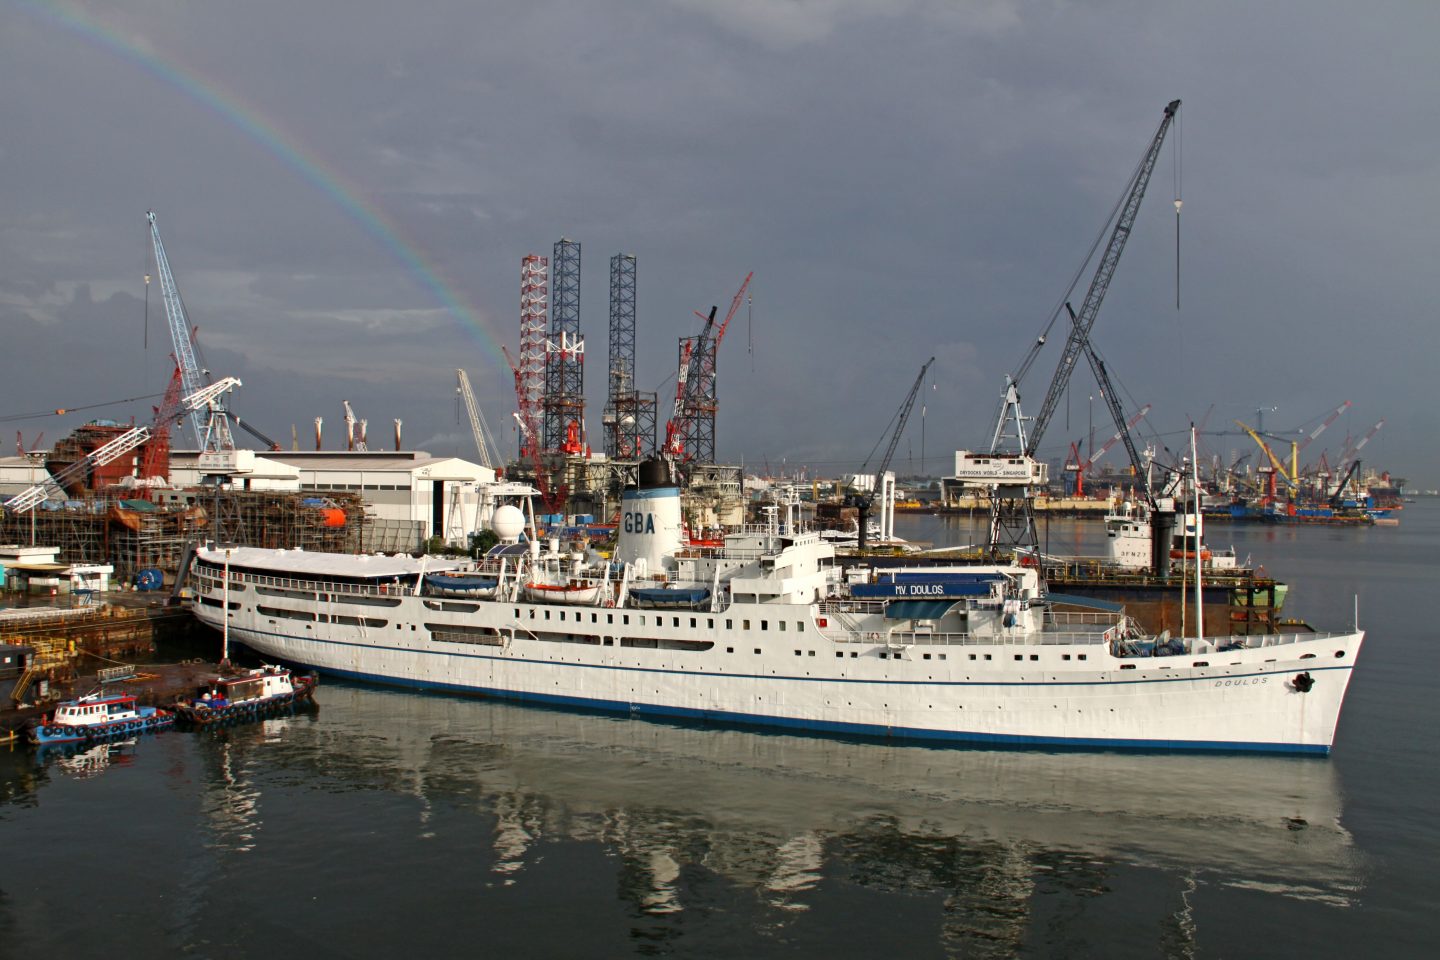 The MV Doulos at the end of her 32-year run, with a rainbow as a reminder of Gods goodness and faithfulness throughout all these years.